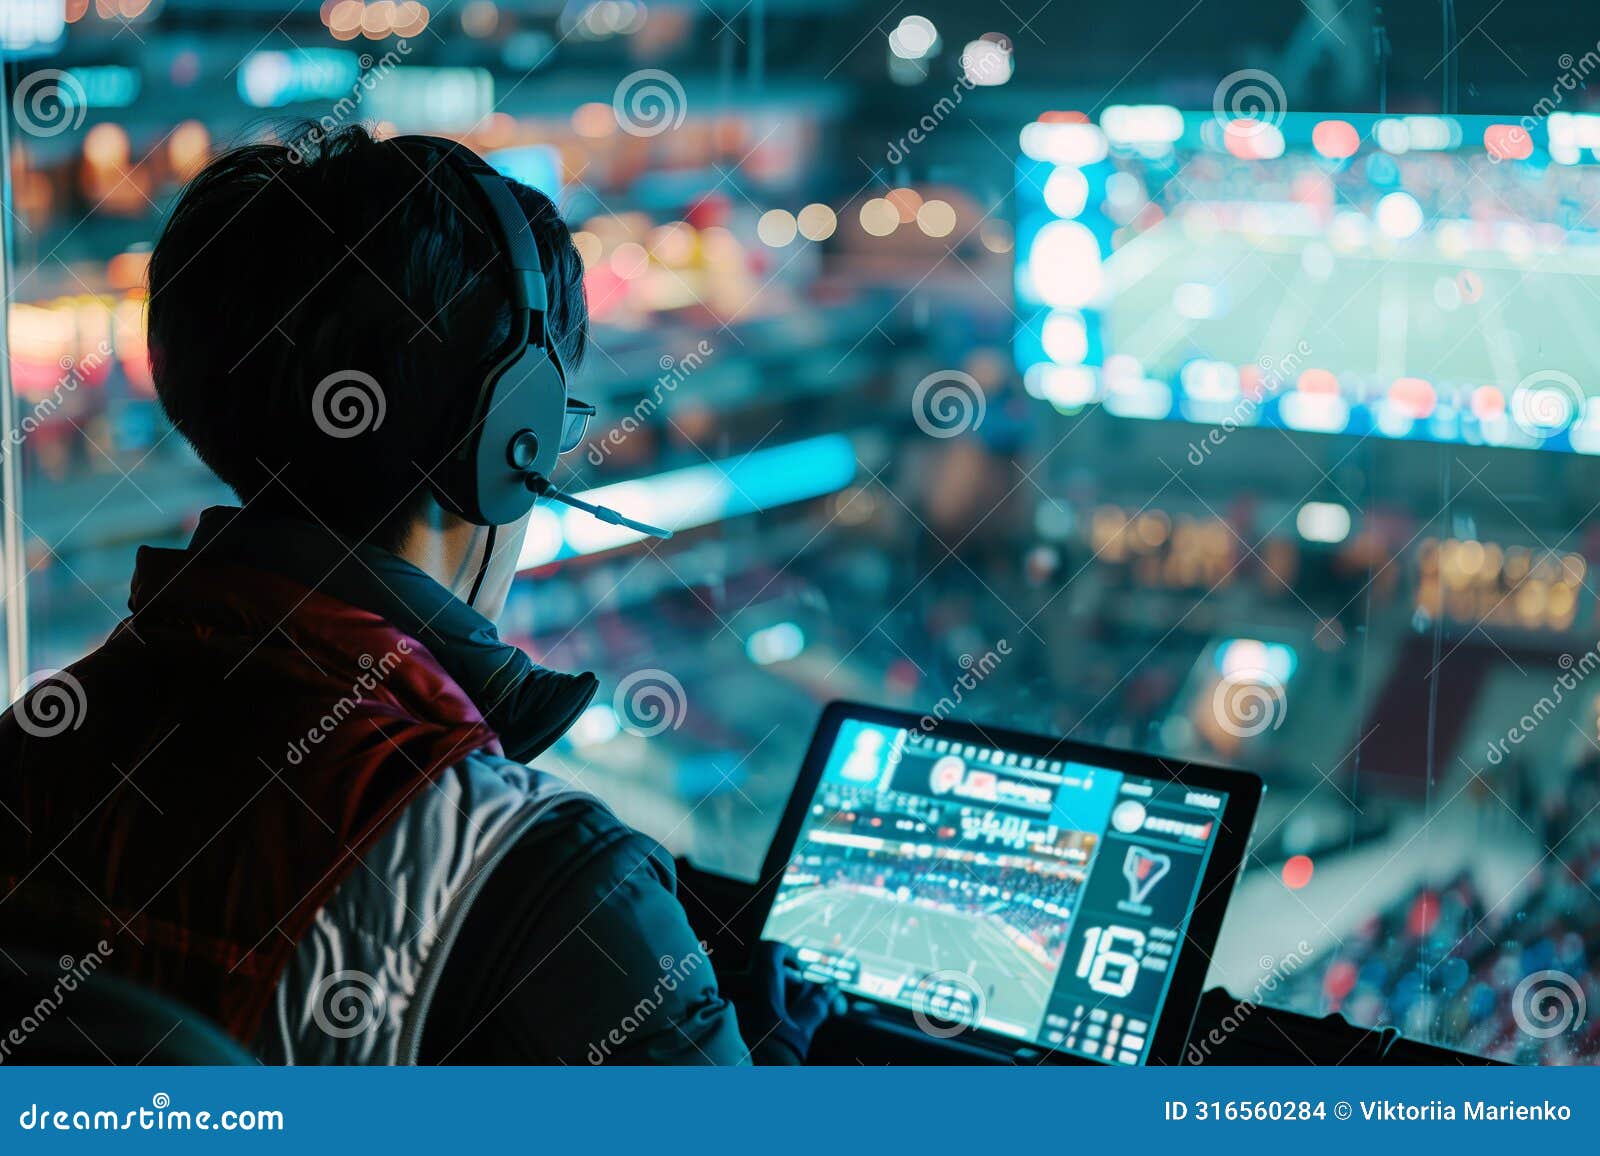 professional football commentator in headphones behind monitor screen commenting on football match